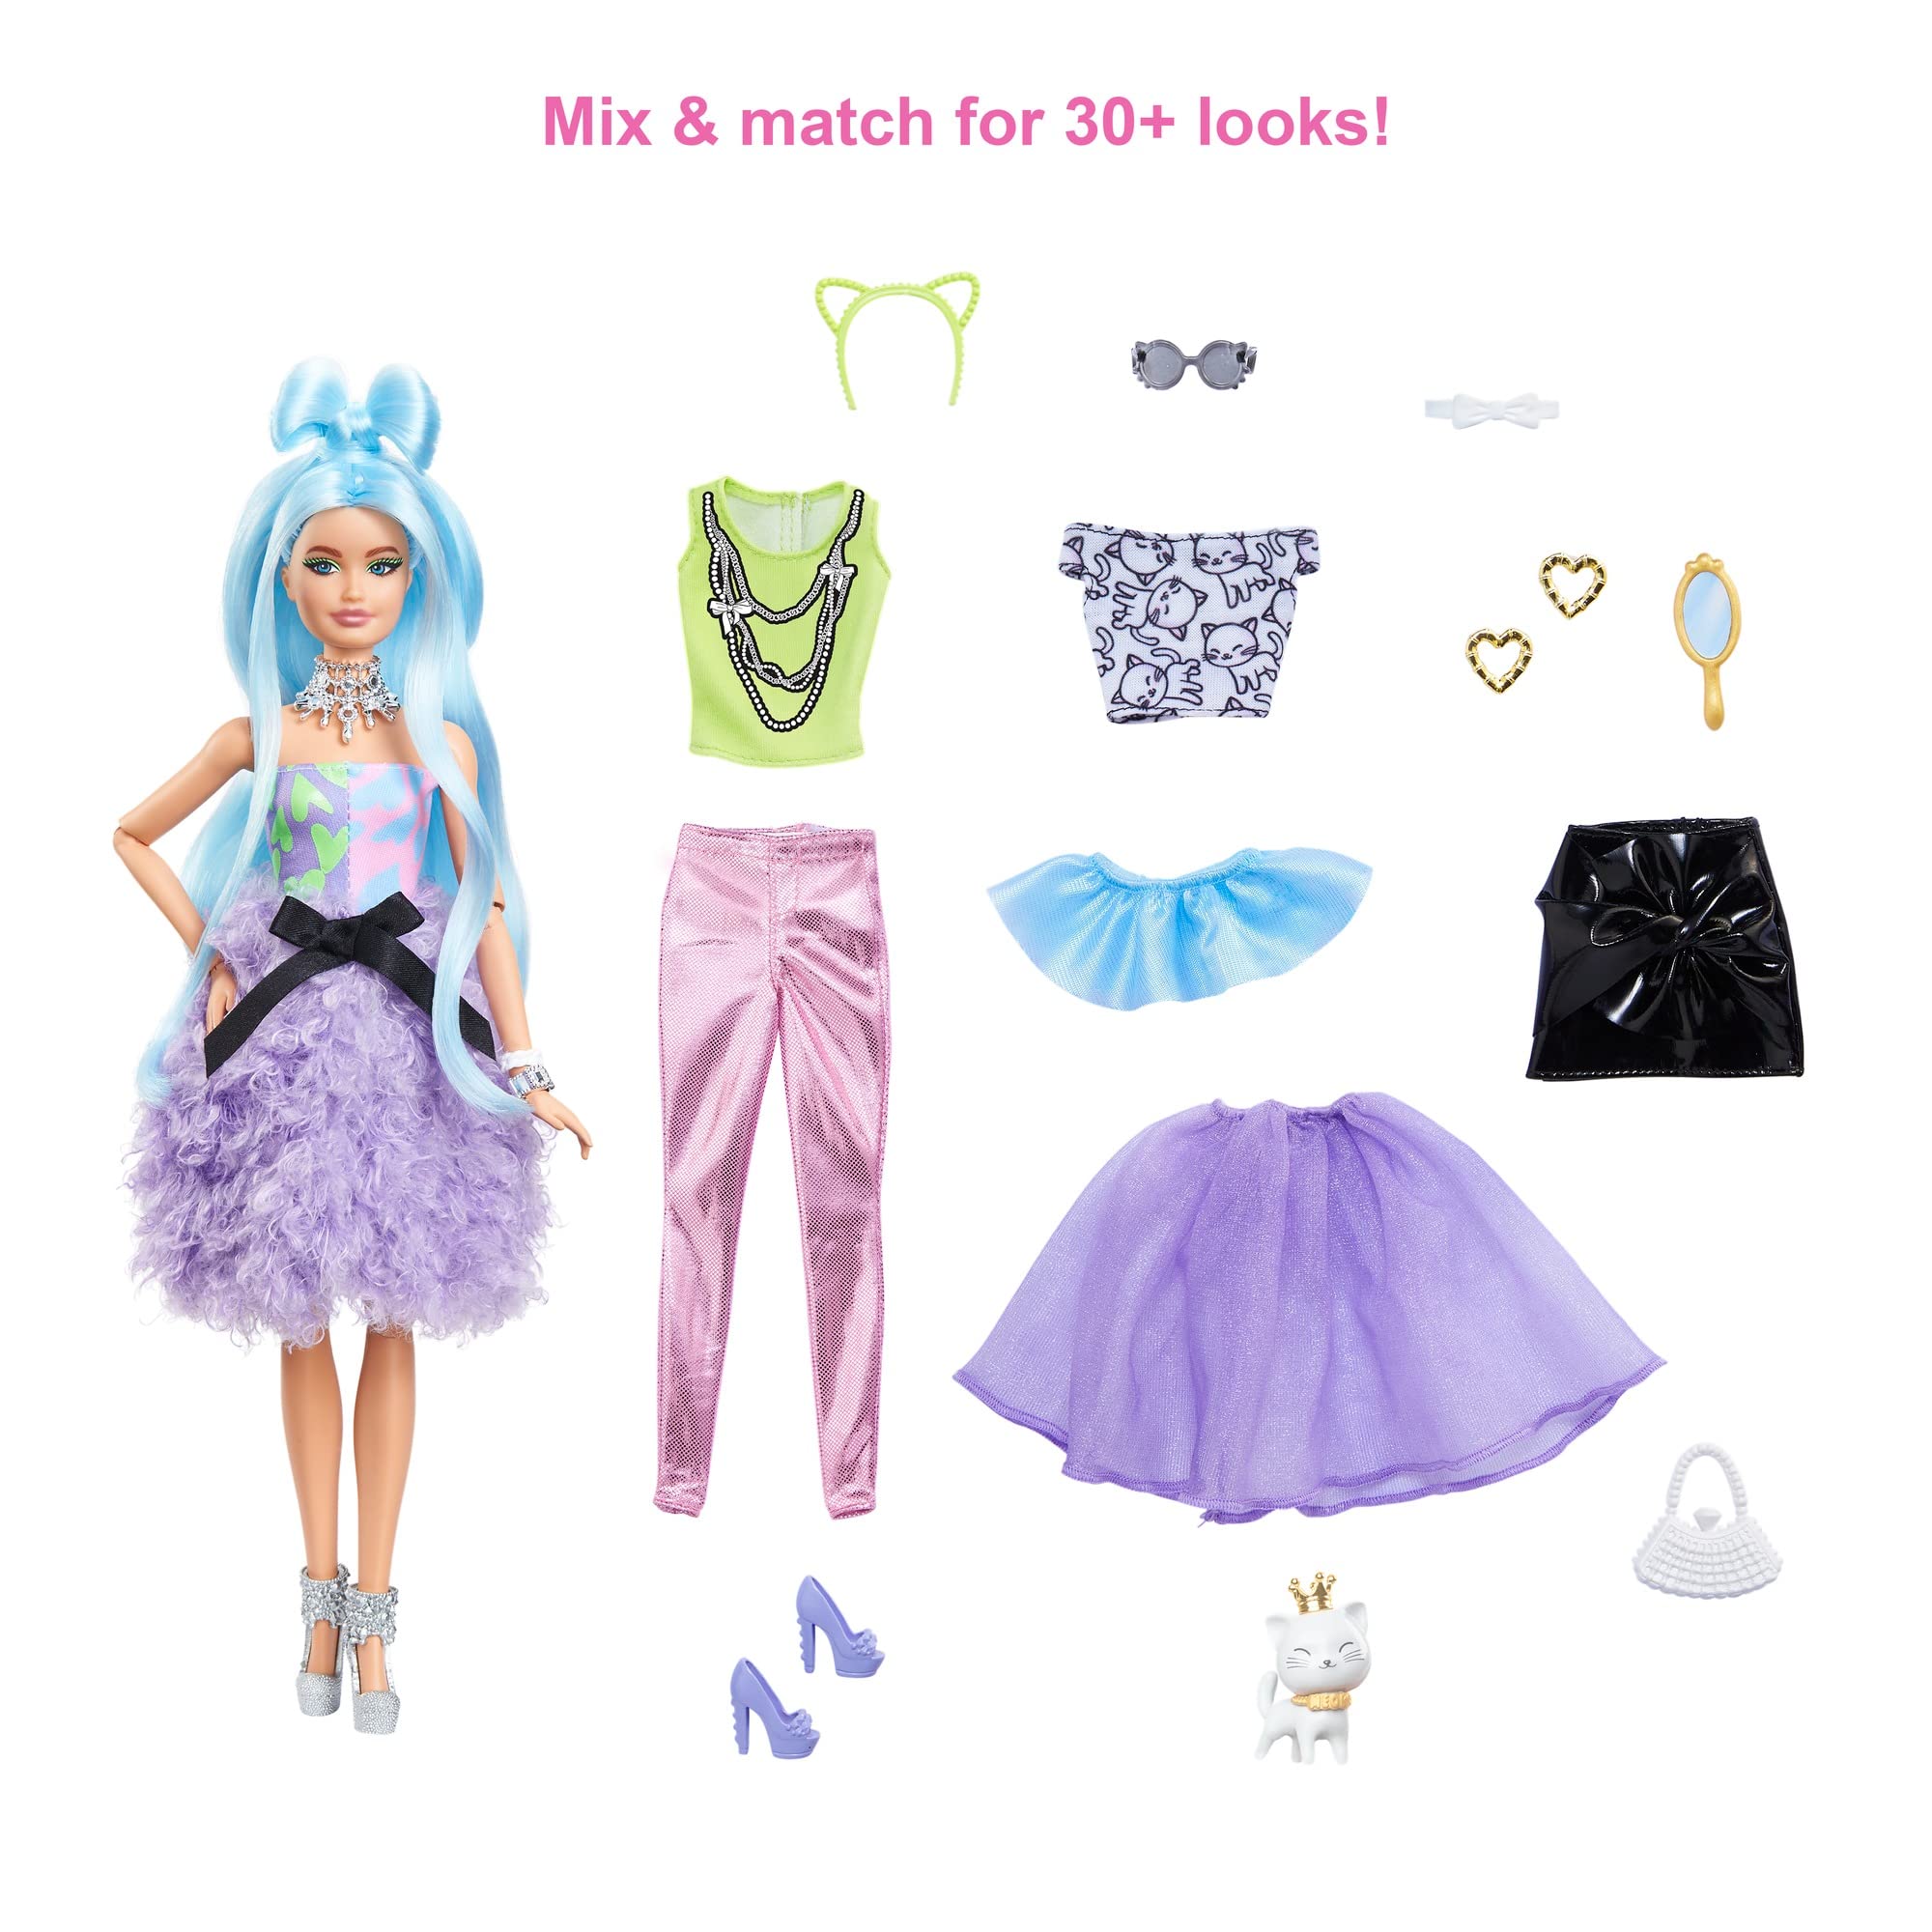 Barbie Extra Doll & Accessories Set with Pet, Mix & Match Pieces for 30+ Looks, Multiple Flexible Joints, Kids 3 Years Old & Up, GYJ69